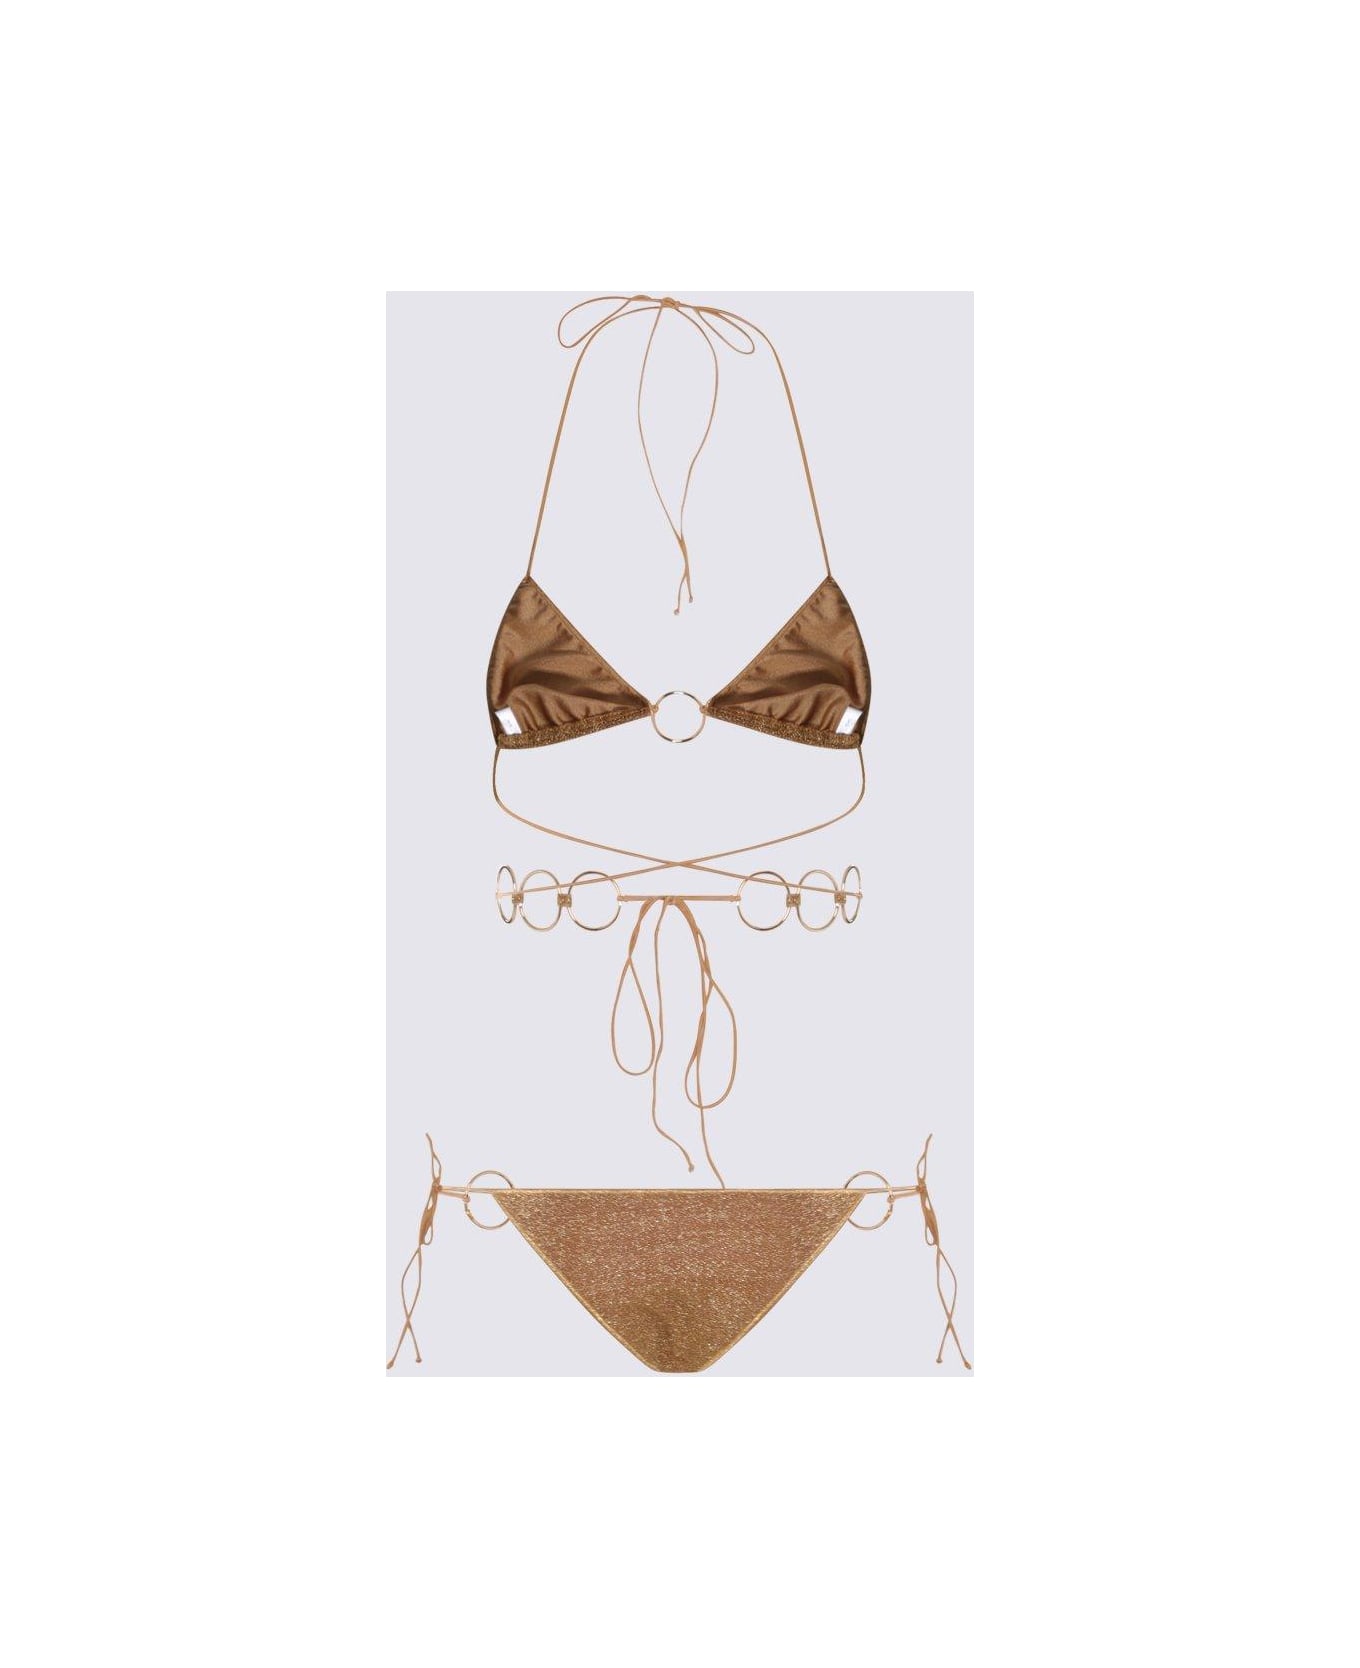 Oseree Strap Detailed Two-piece Bikini Suit - Toffee 水着